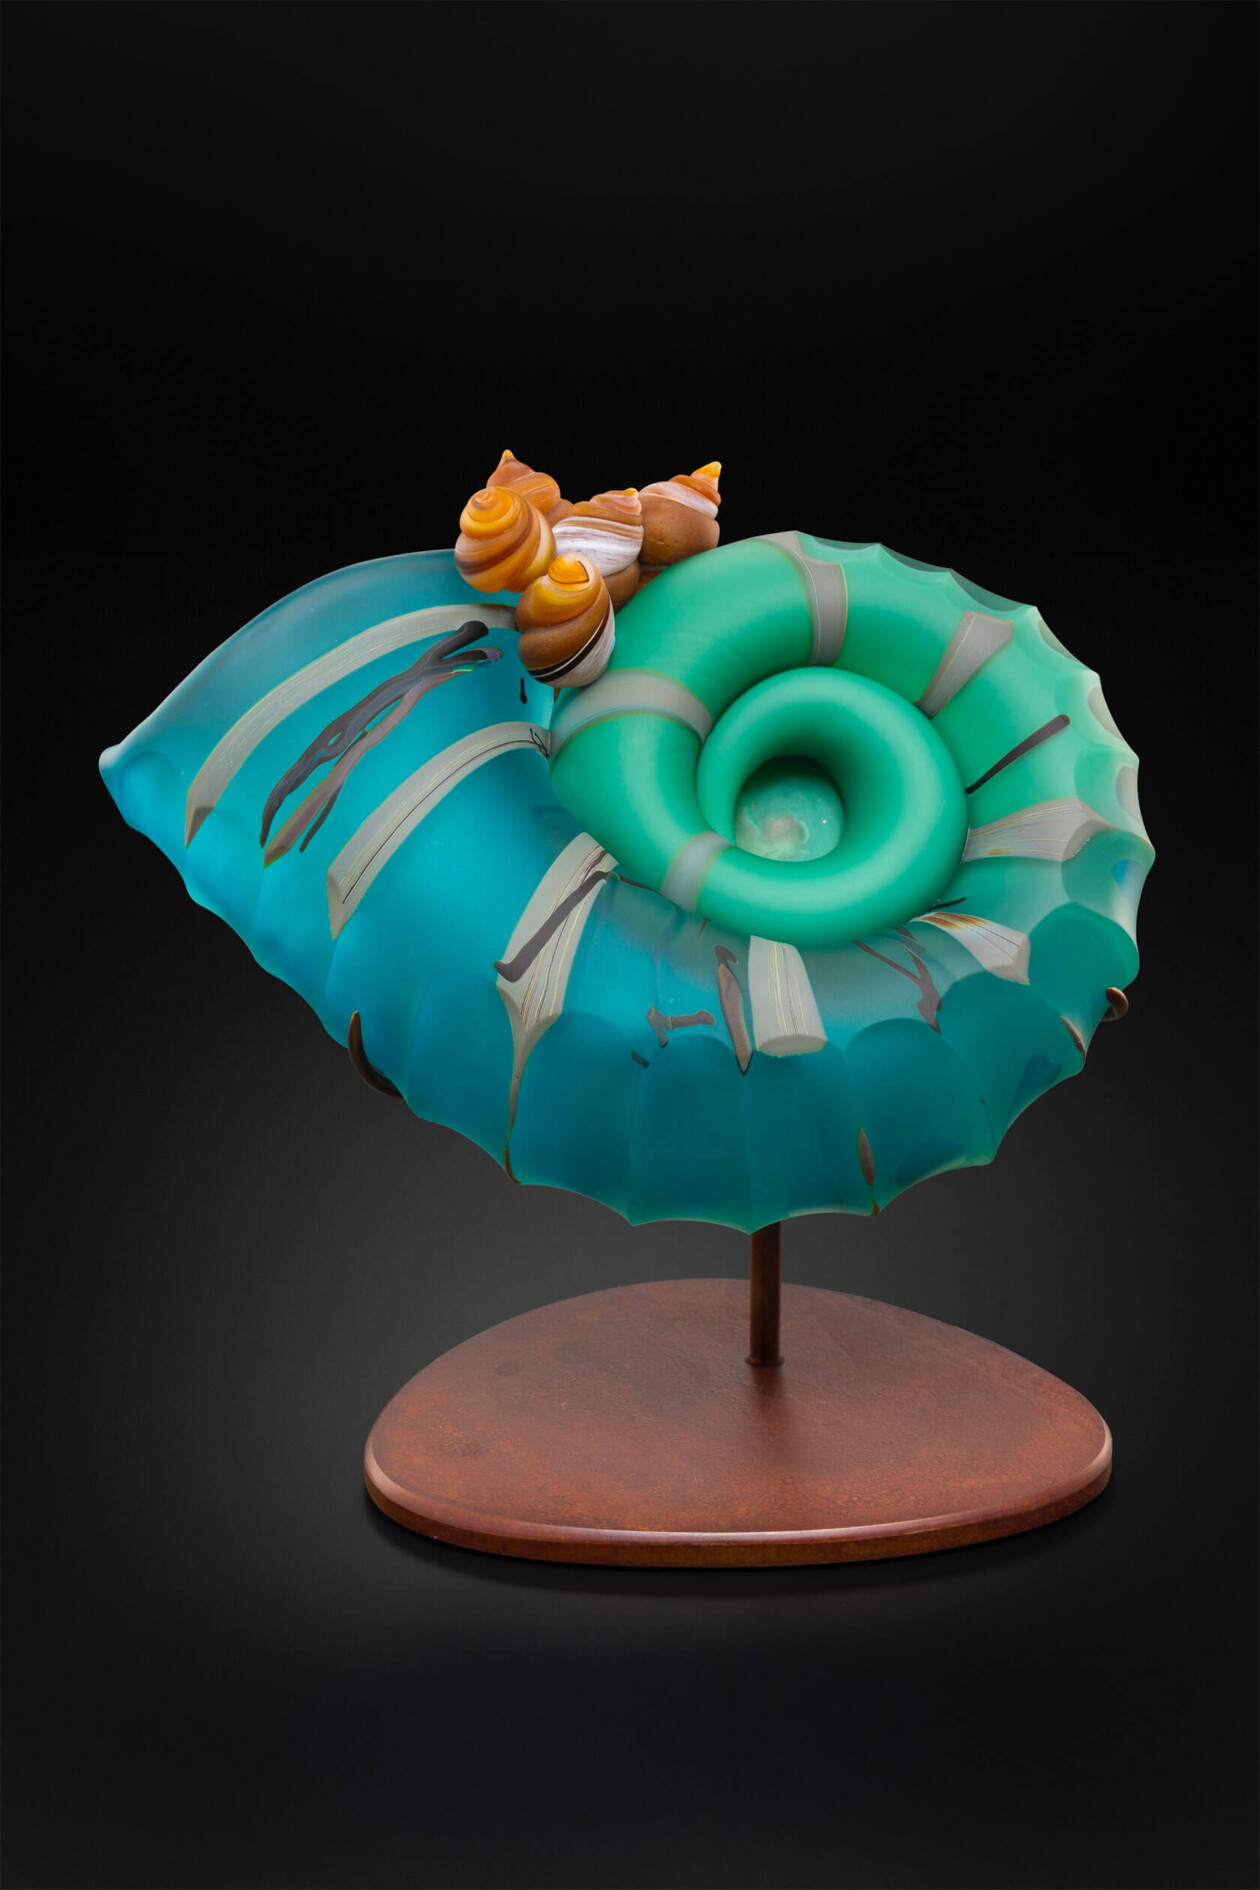 Kelly O’dell's Animal Glass Sculptures (4)